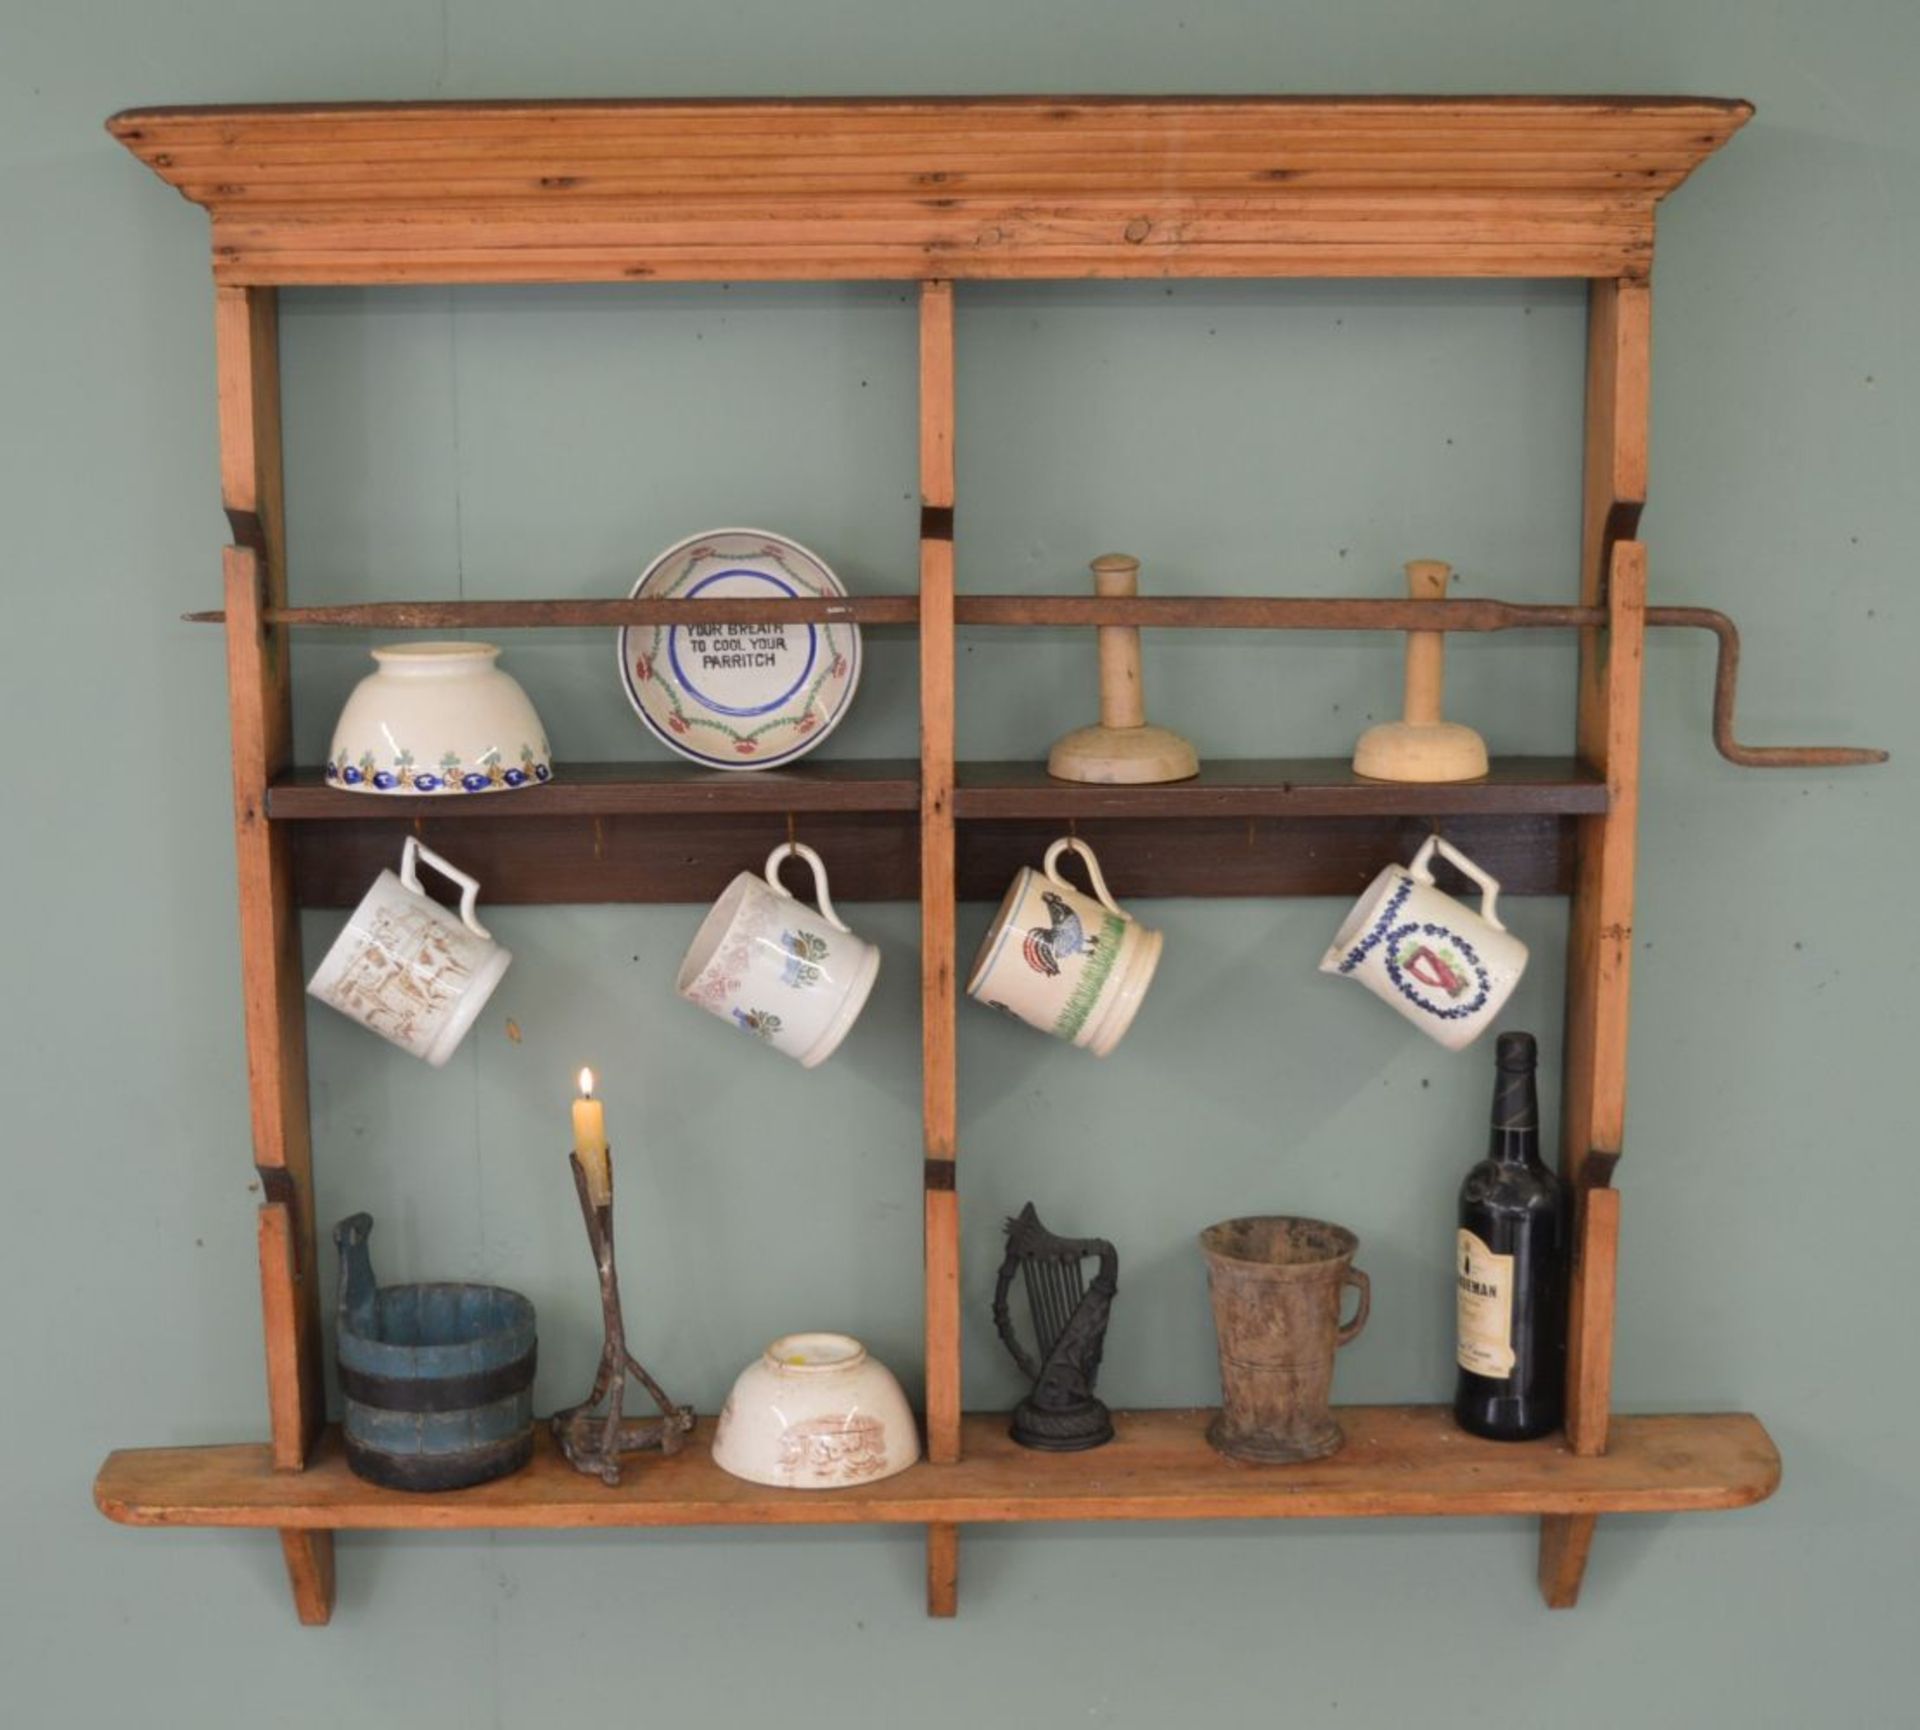 19TH-CENTURY PINE WALL-MOUNTED SPIT RACK